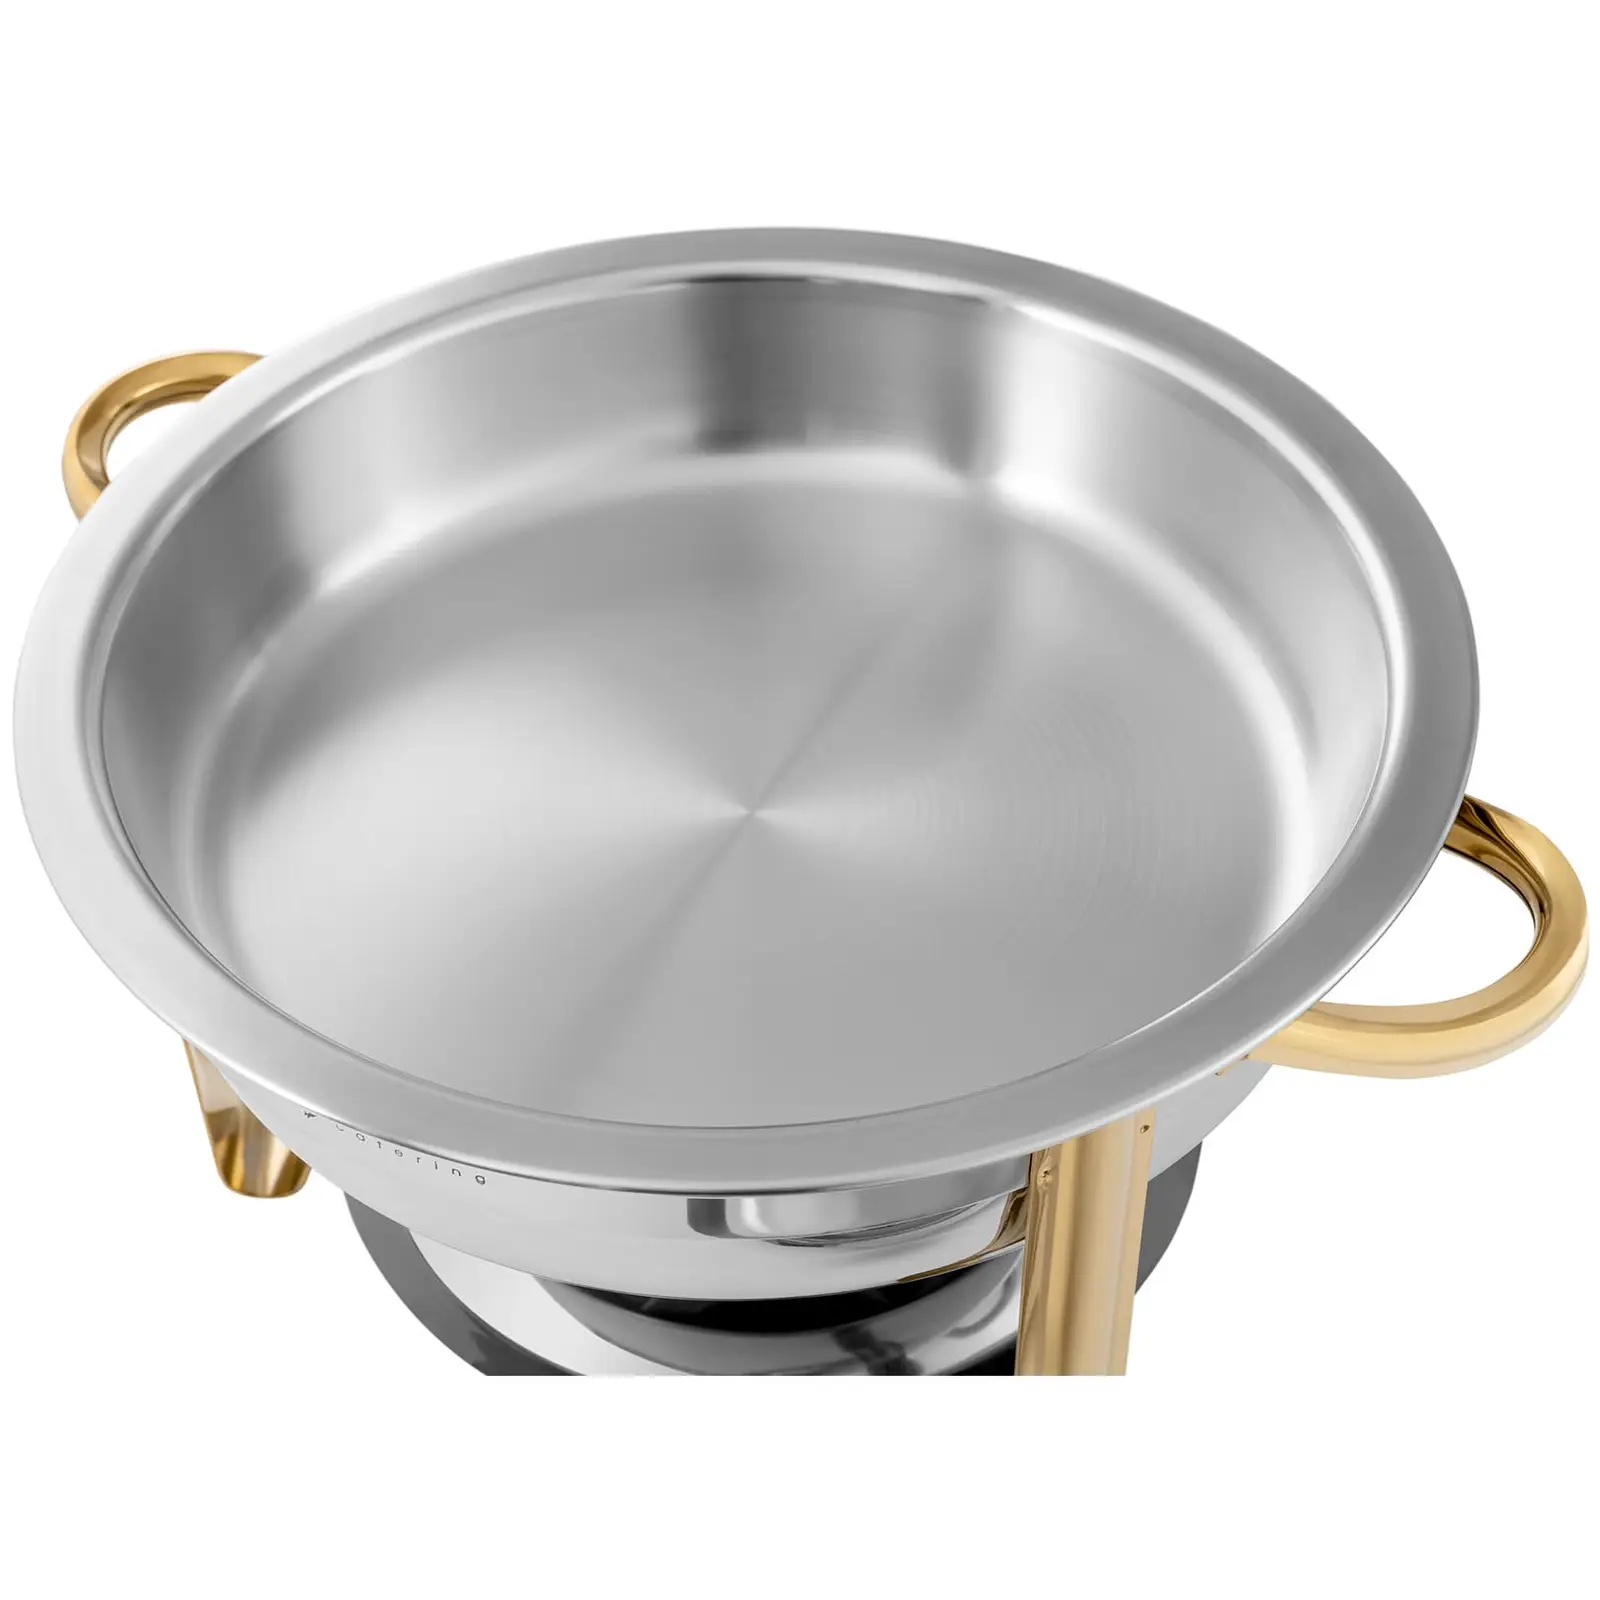 Chafing Dish - round - gold accents - 4.5 L - 1 fuel cell - Royal Catering